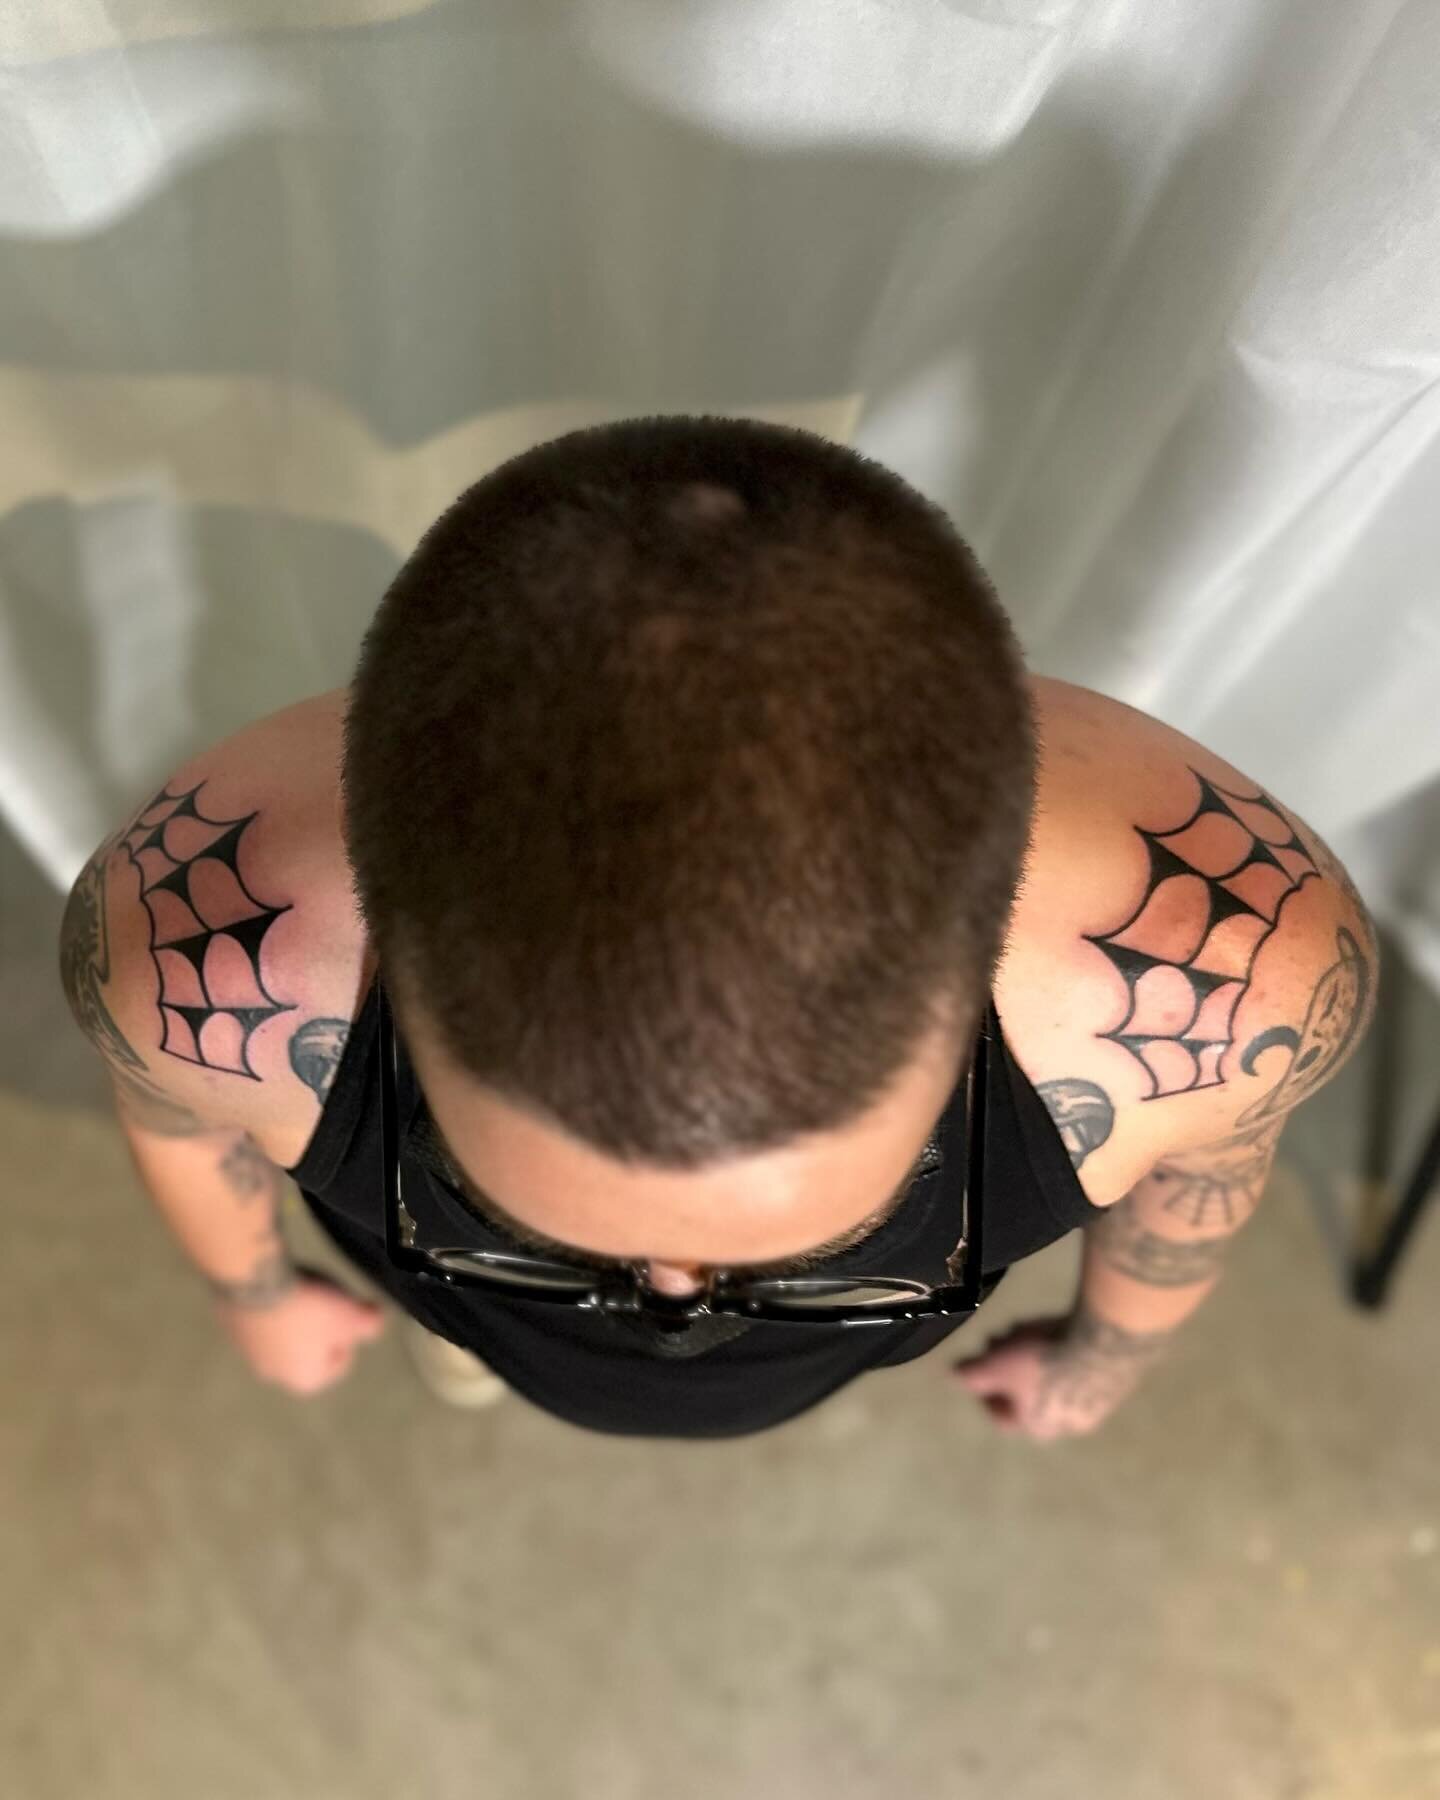 Custom shoulder webs to cap off the arms!  Thank you so much, I think most tattooers know how difficult symmetrical or symmetrical-ish designs and placements can be. Patience and attention to detail on both client and artist&rsquo;s sides always pays